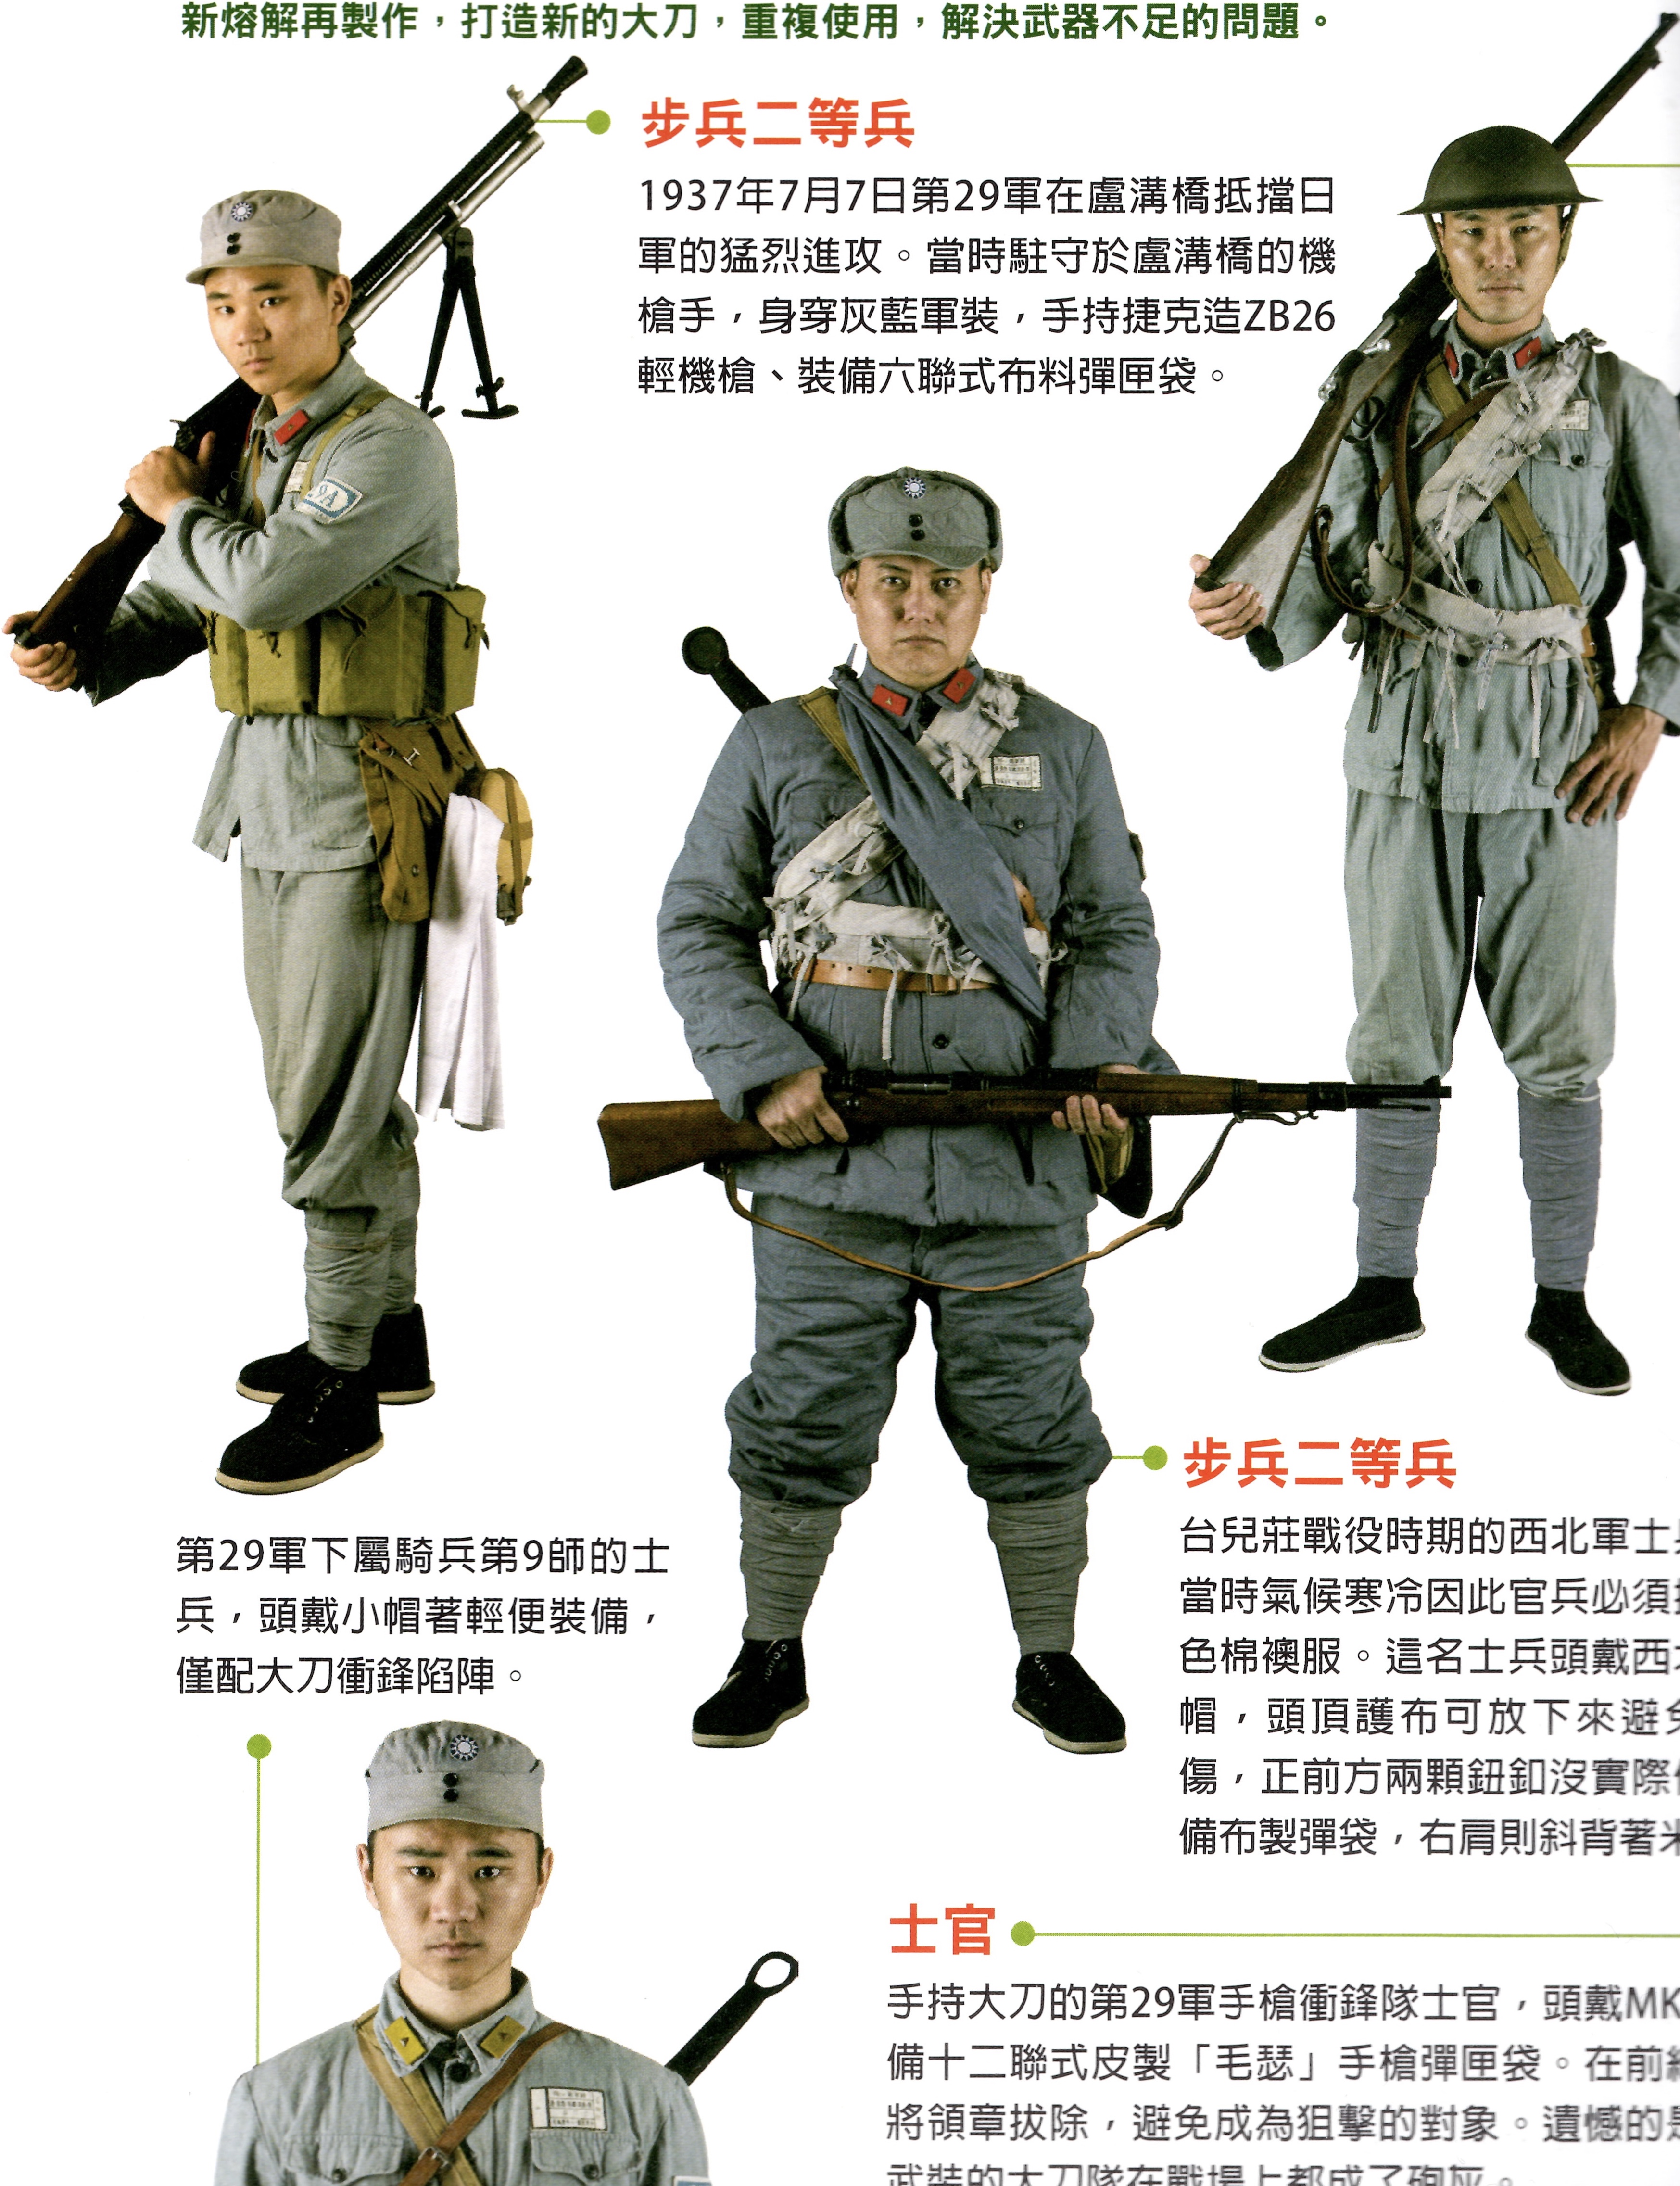 A Century of Chinese Uniforms | China in WW2 | Mobile Version